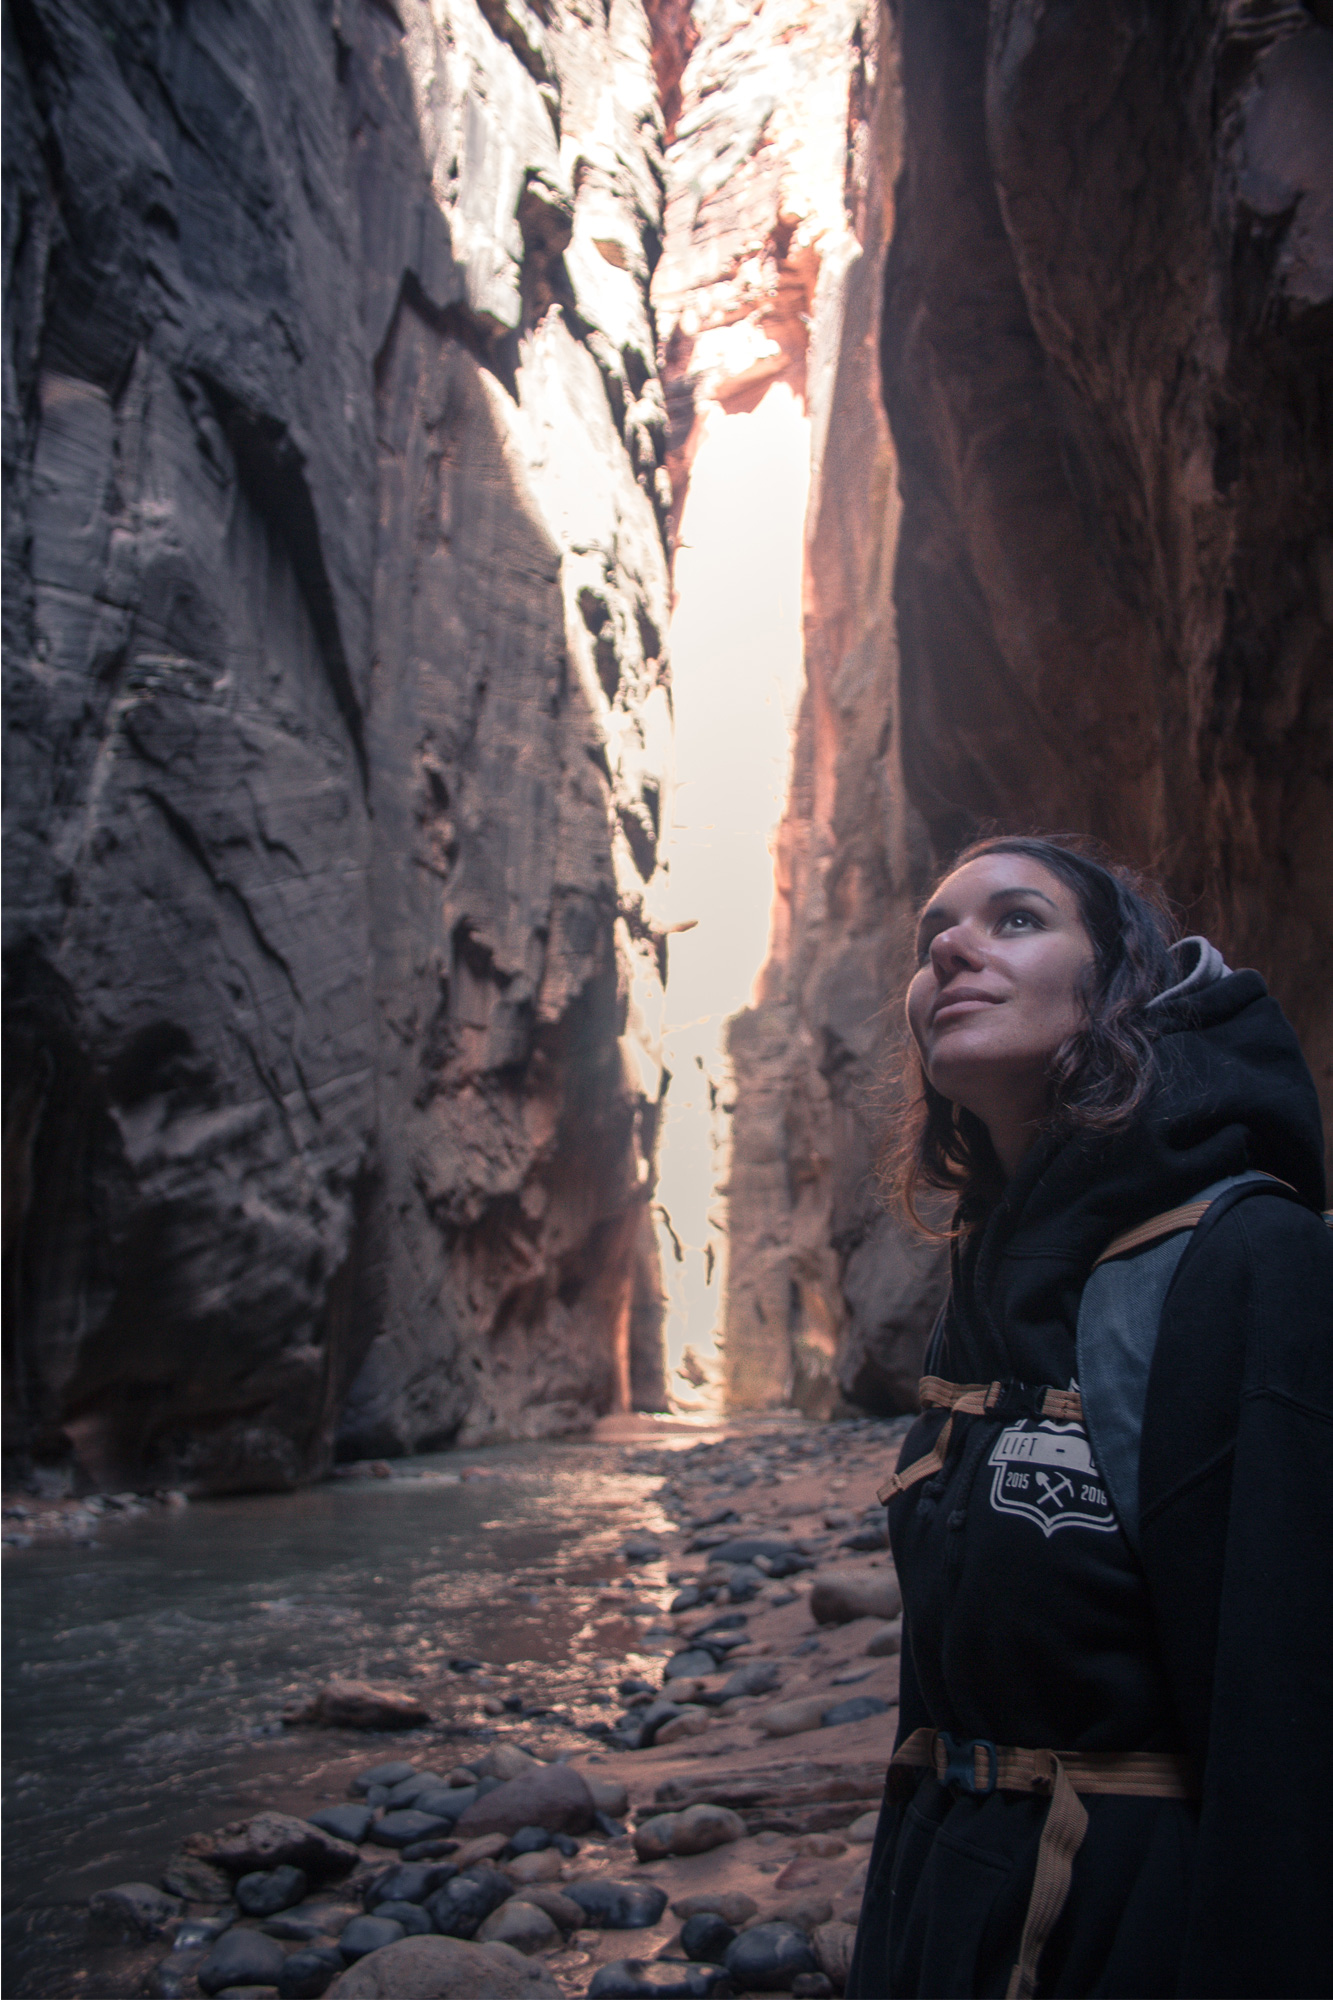 The Narrows, Zion. One of the Most beautiful US national parks